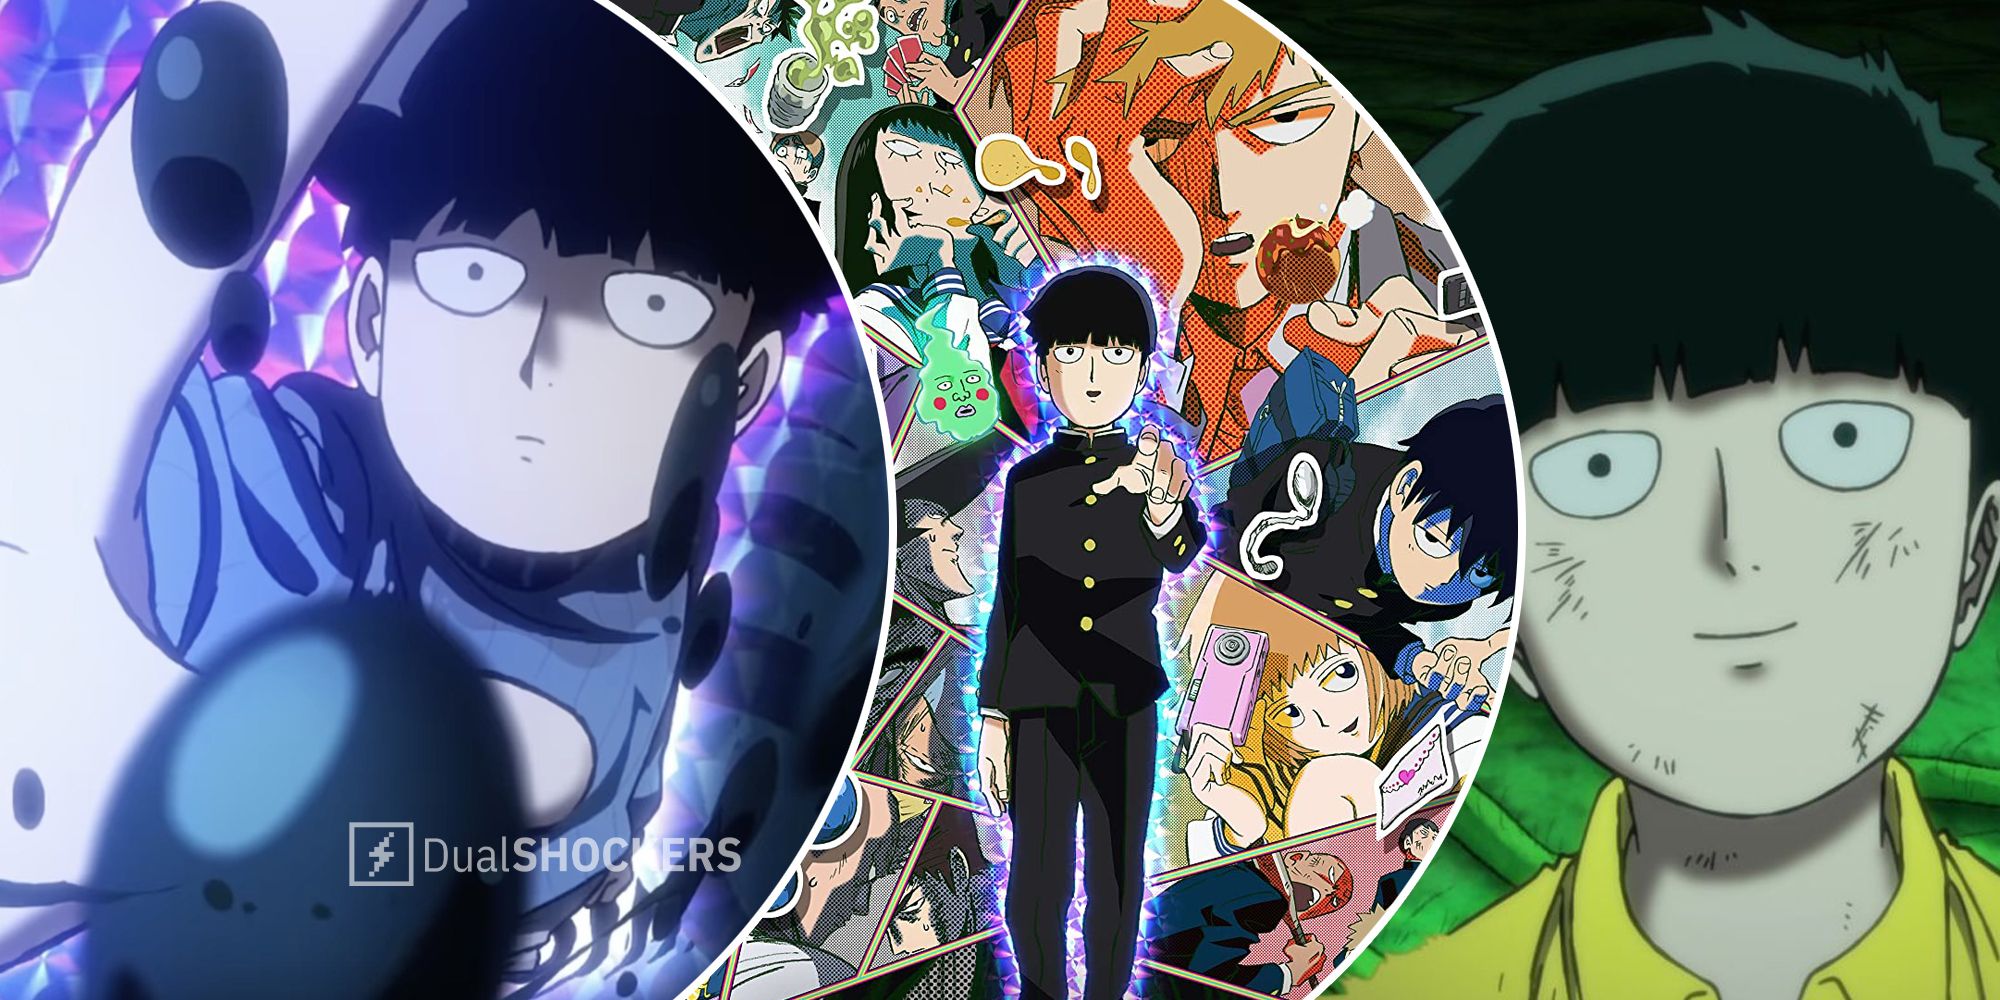 Mob Psycho 100 Season 3 RELEASE DATE Situation Clarification! 